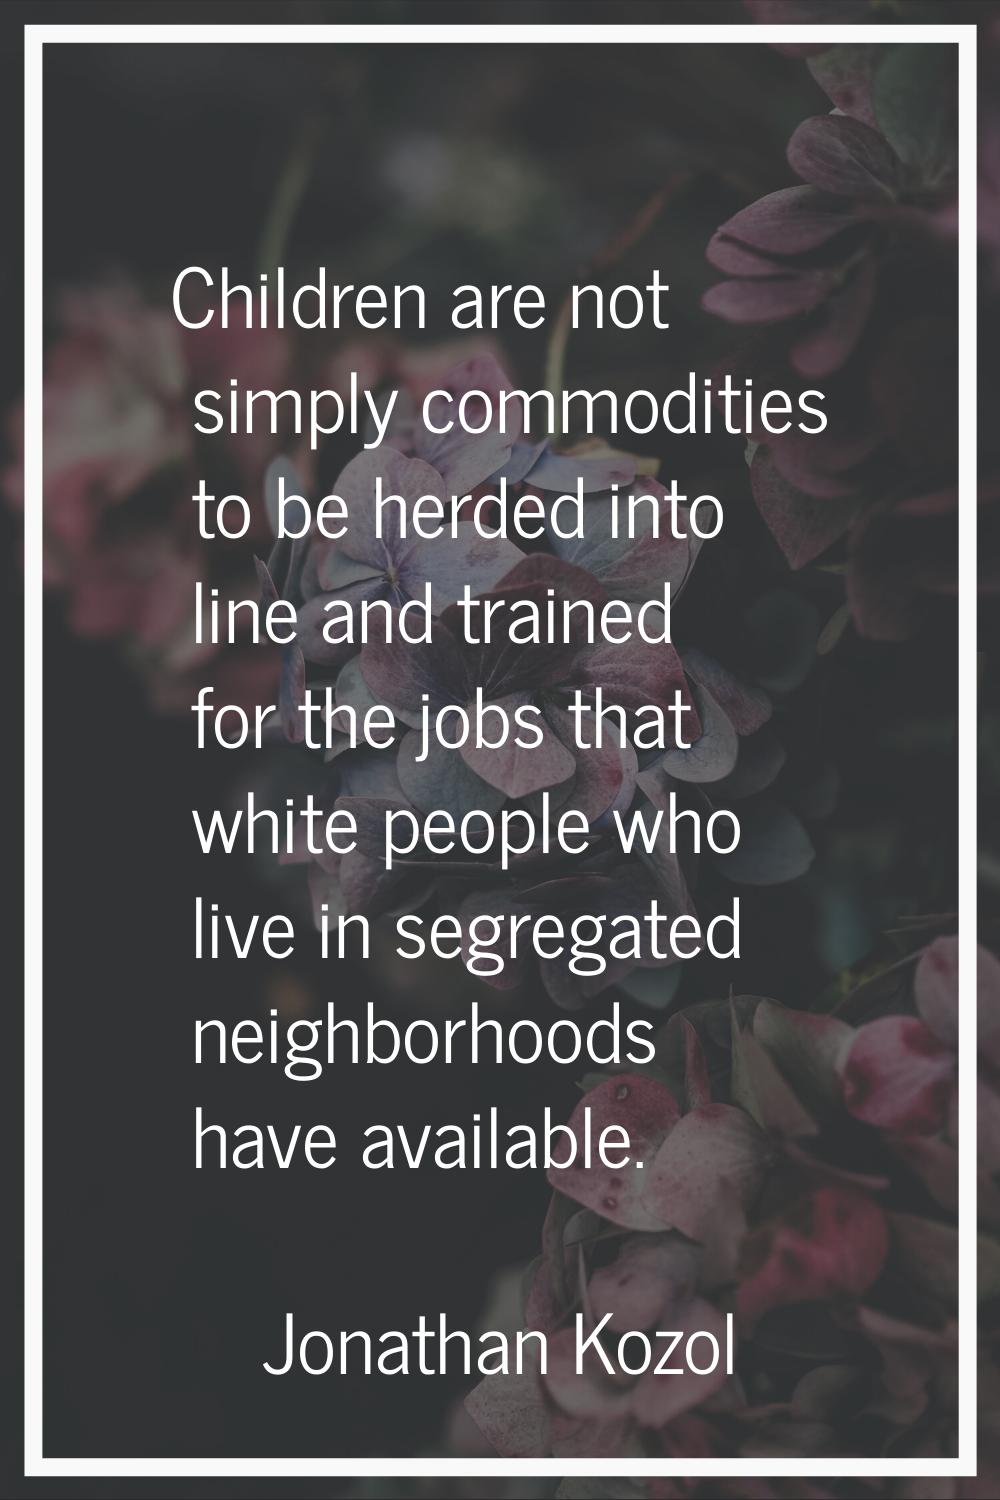 Children are not simply commodities to be herded into line and trained for the jobs that white peop